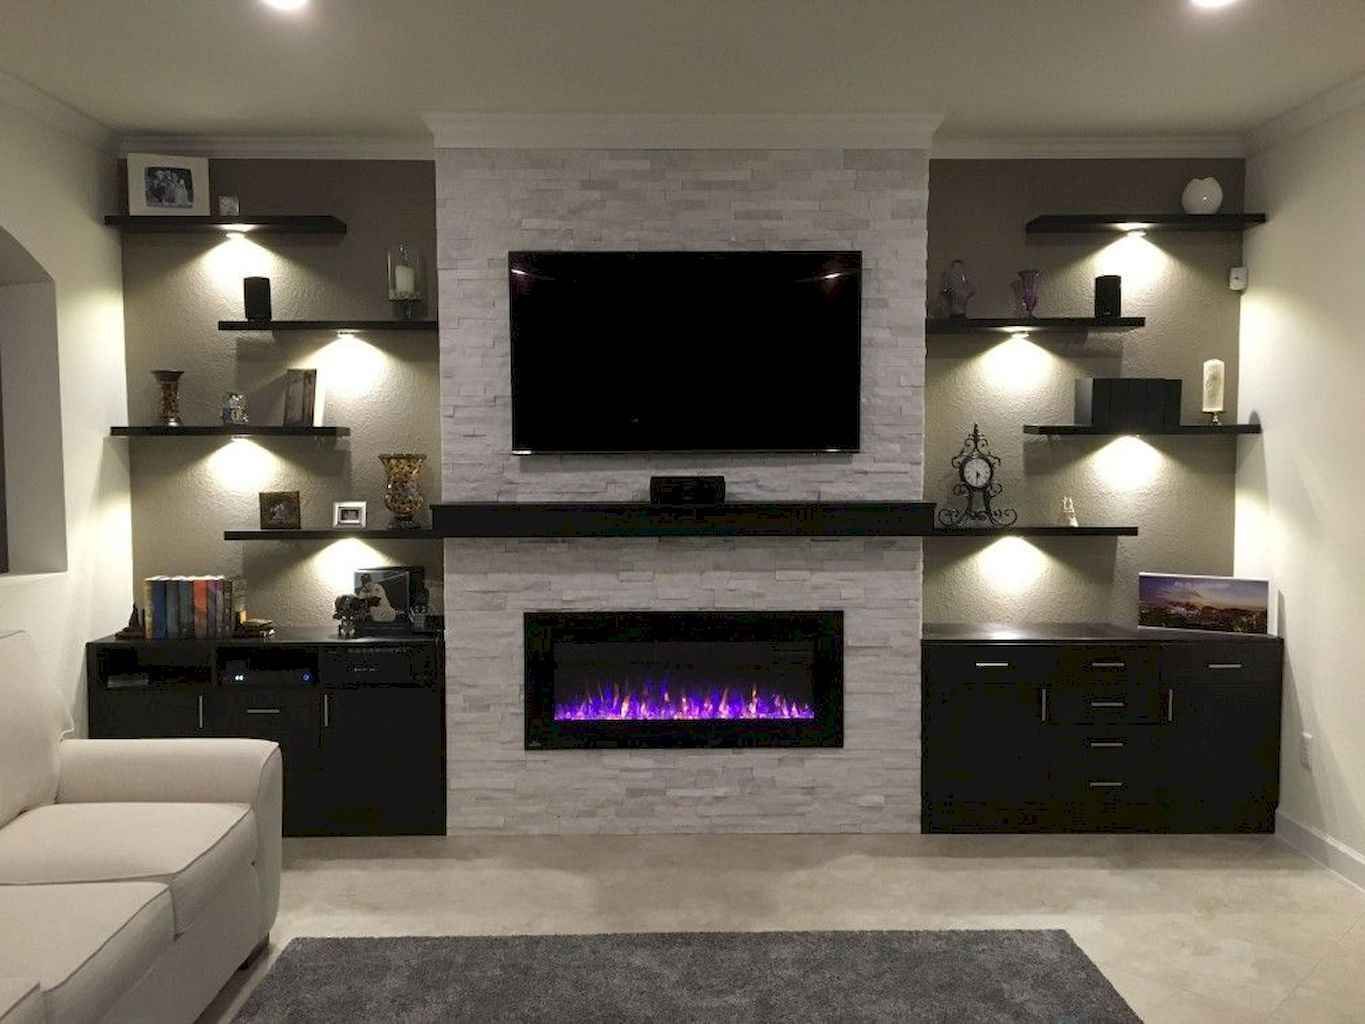 Fireplace Tv Ideas Awesome 50 Diy Floating Shelves for Living Room Decorating